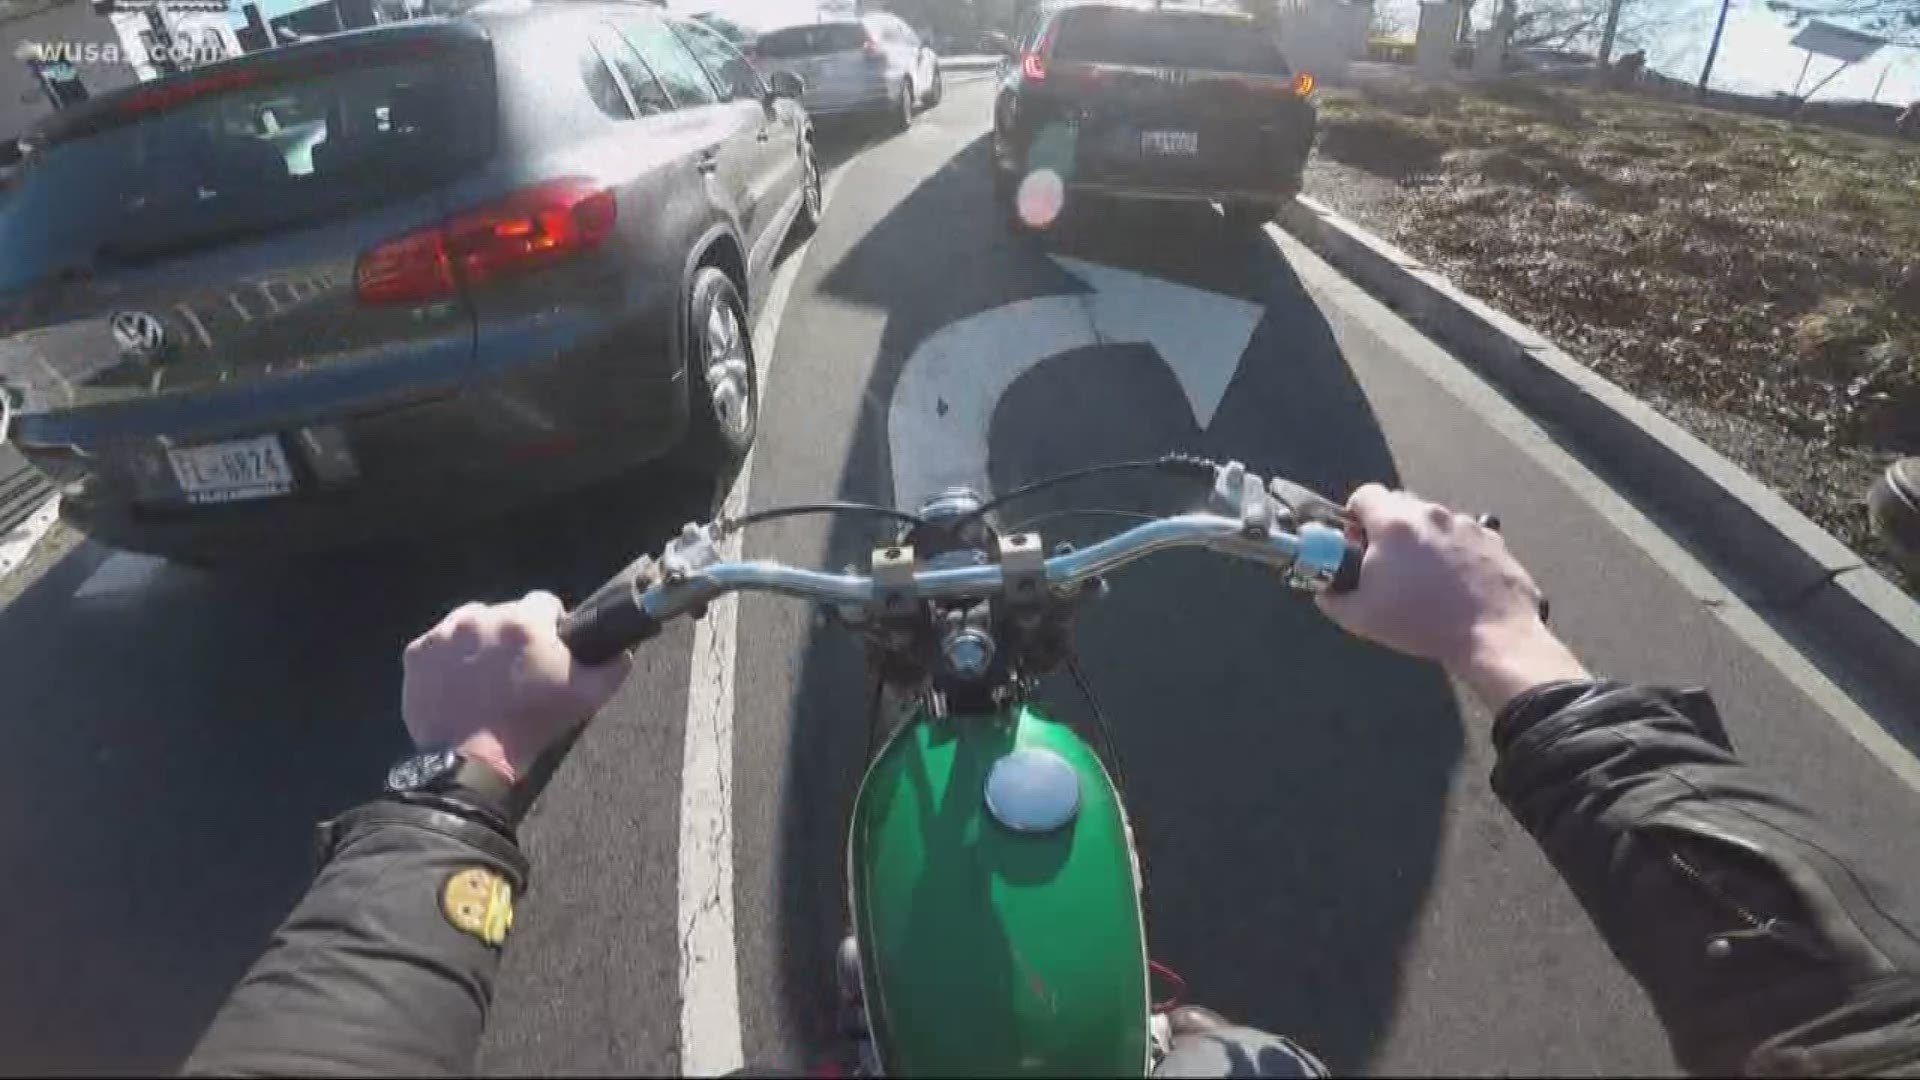 Riders insist that lane splitting makes them safer. They are deathly afraid of being rear-ended-- sandwiched between a fast-moving car from behind and a stopped car in front.